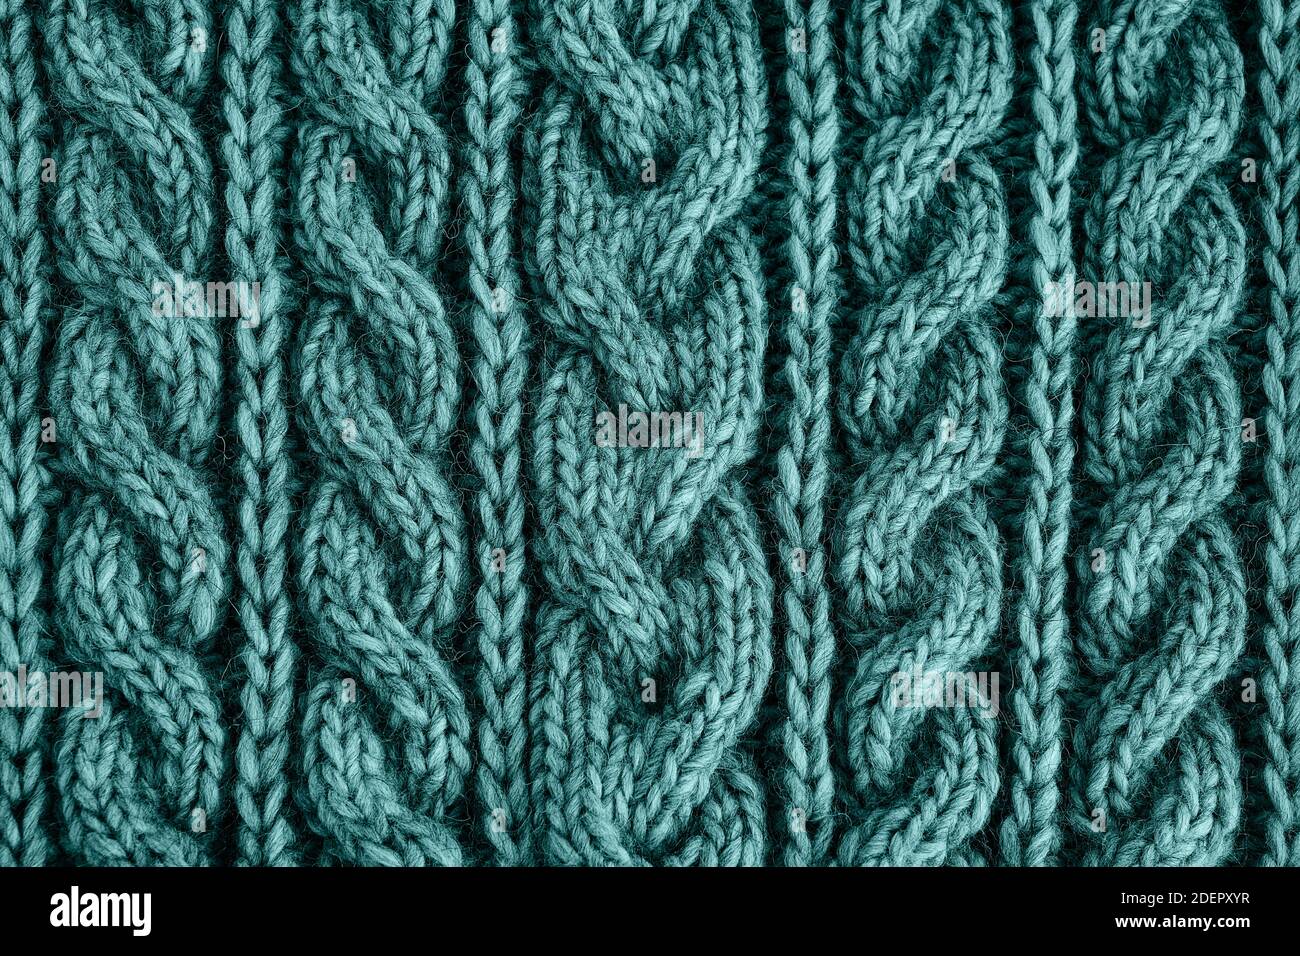 Tidewater green colored knitted texture. Handmade Knitwear. Textured background. Stock Photo